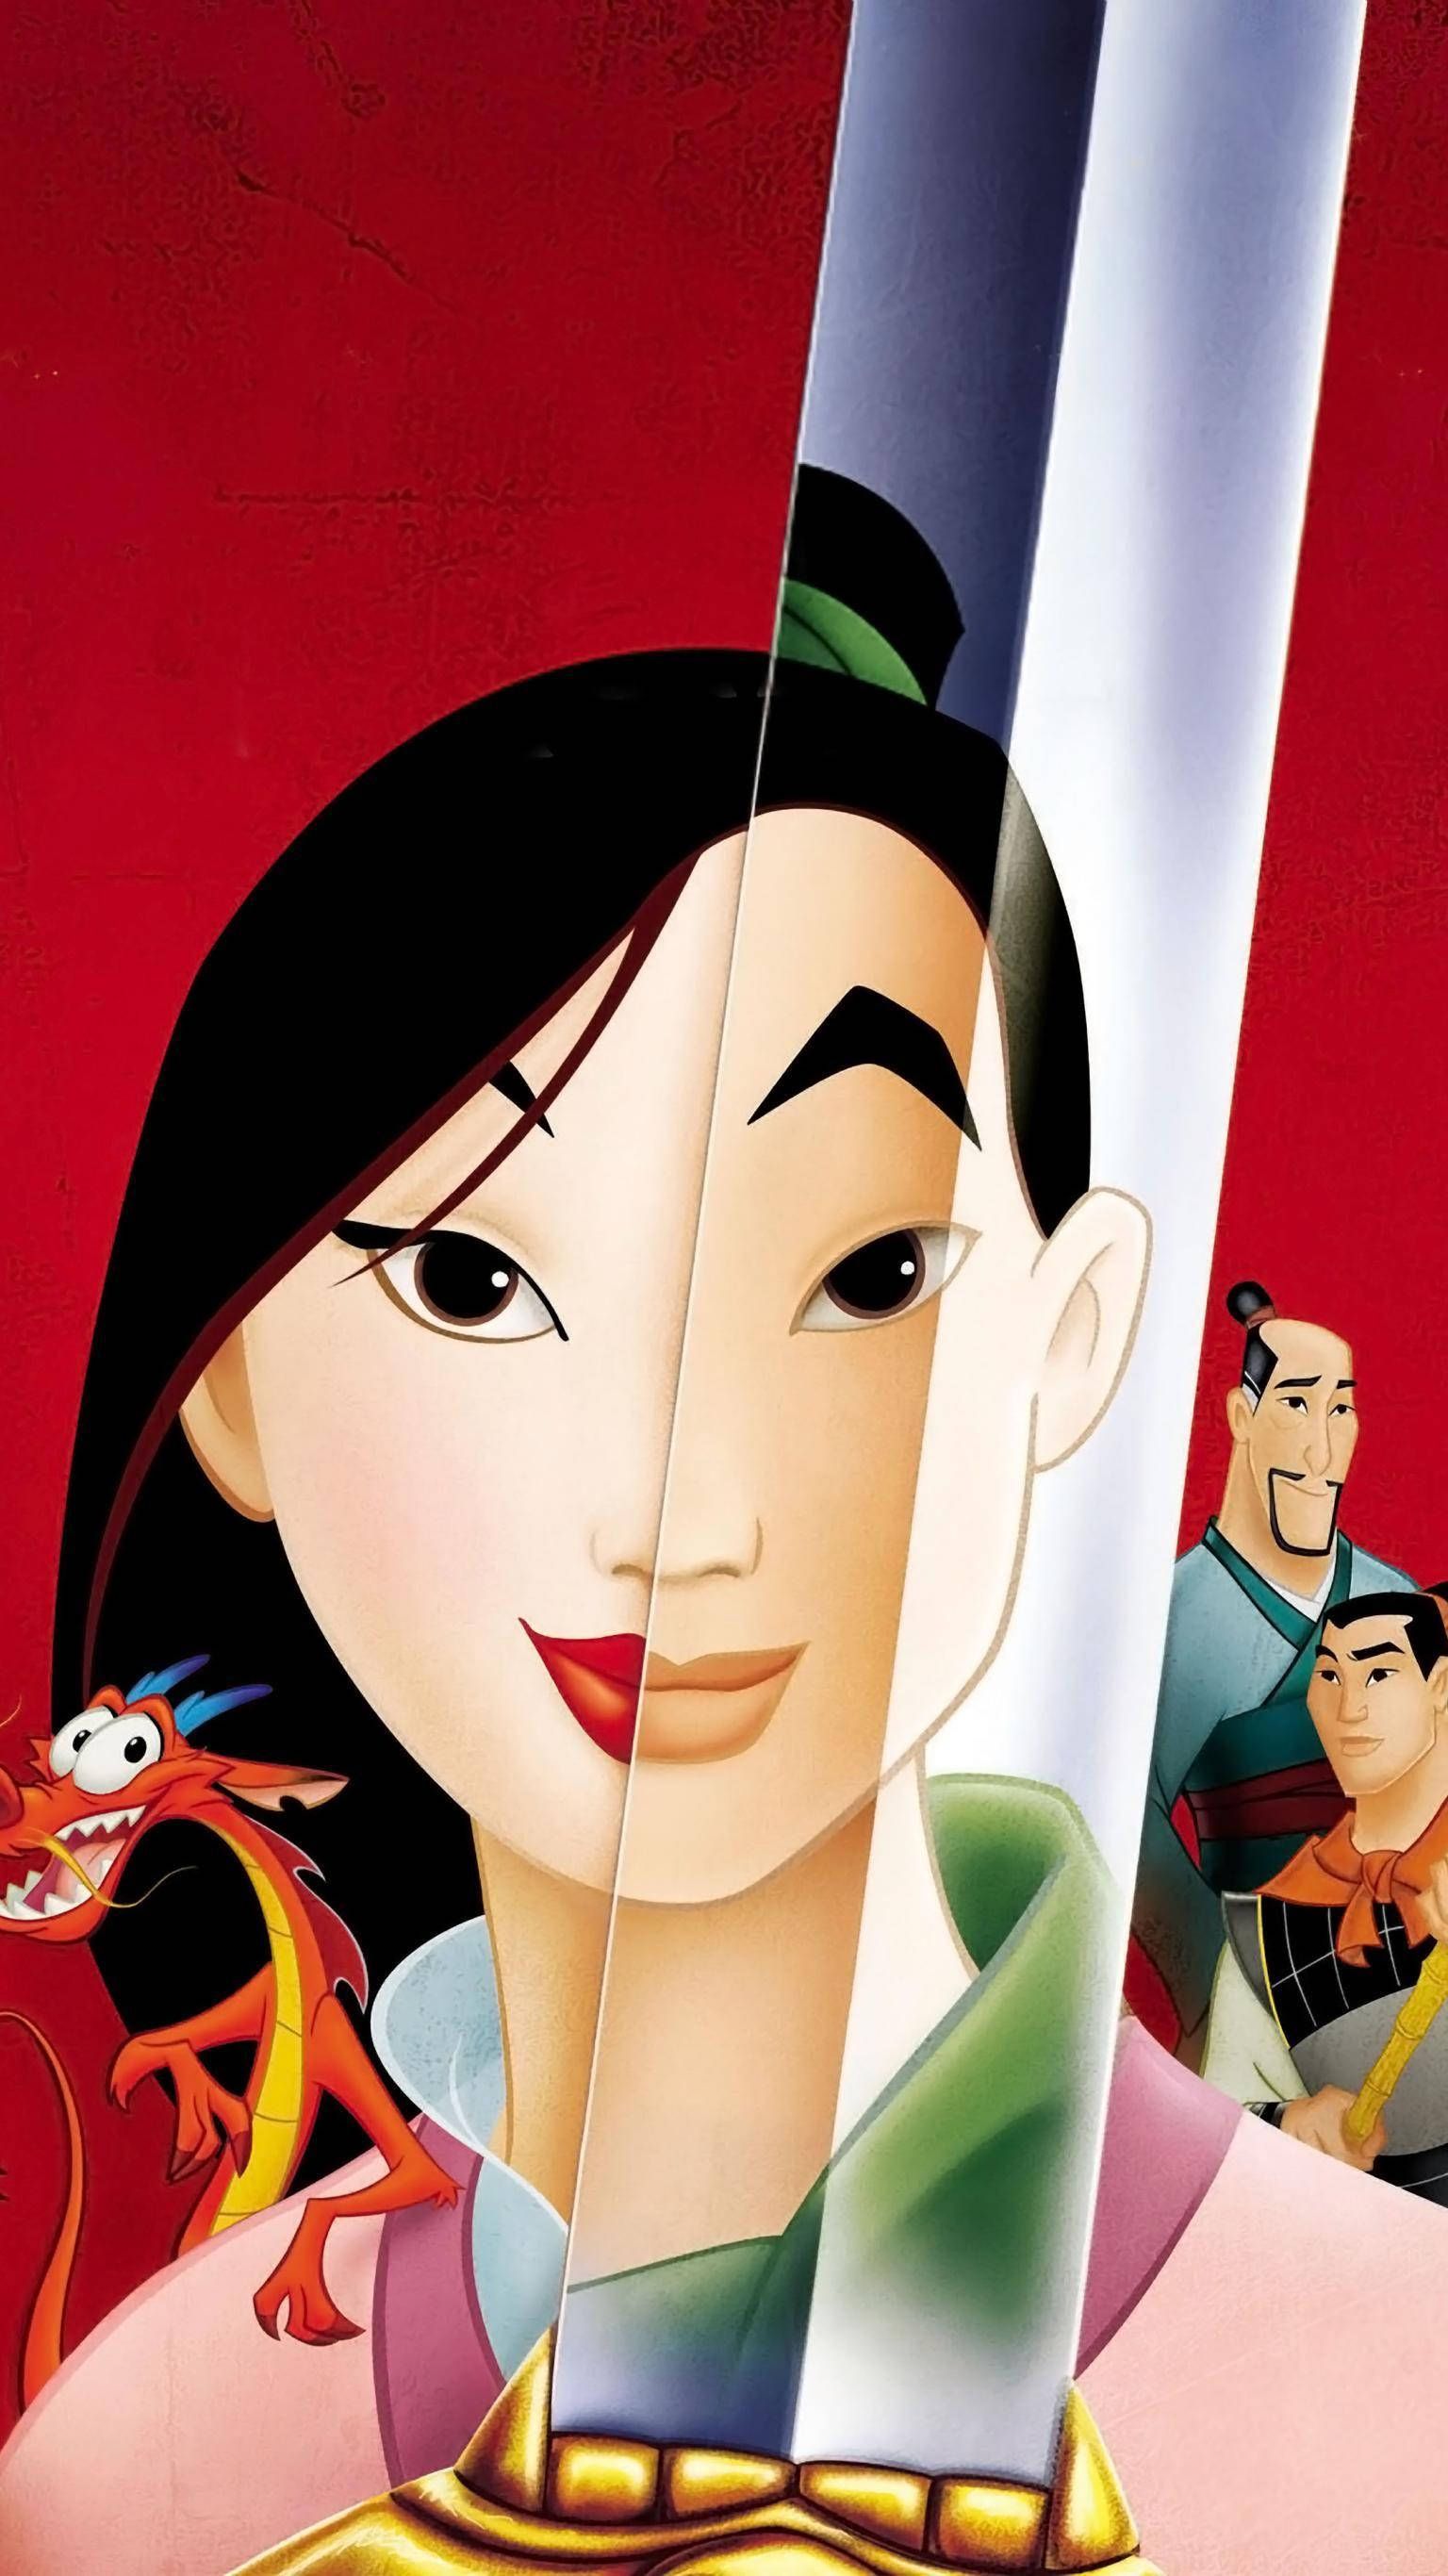 Mulan (1998) is a live-action Disney film based on the animated classic of the same name. - Mulan